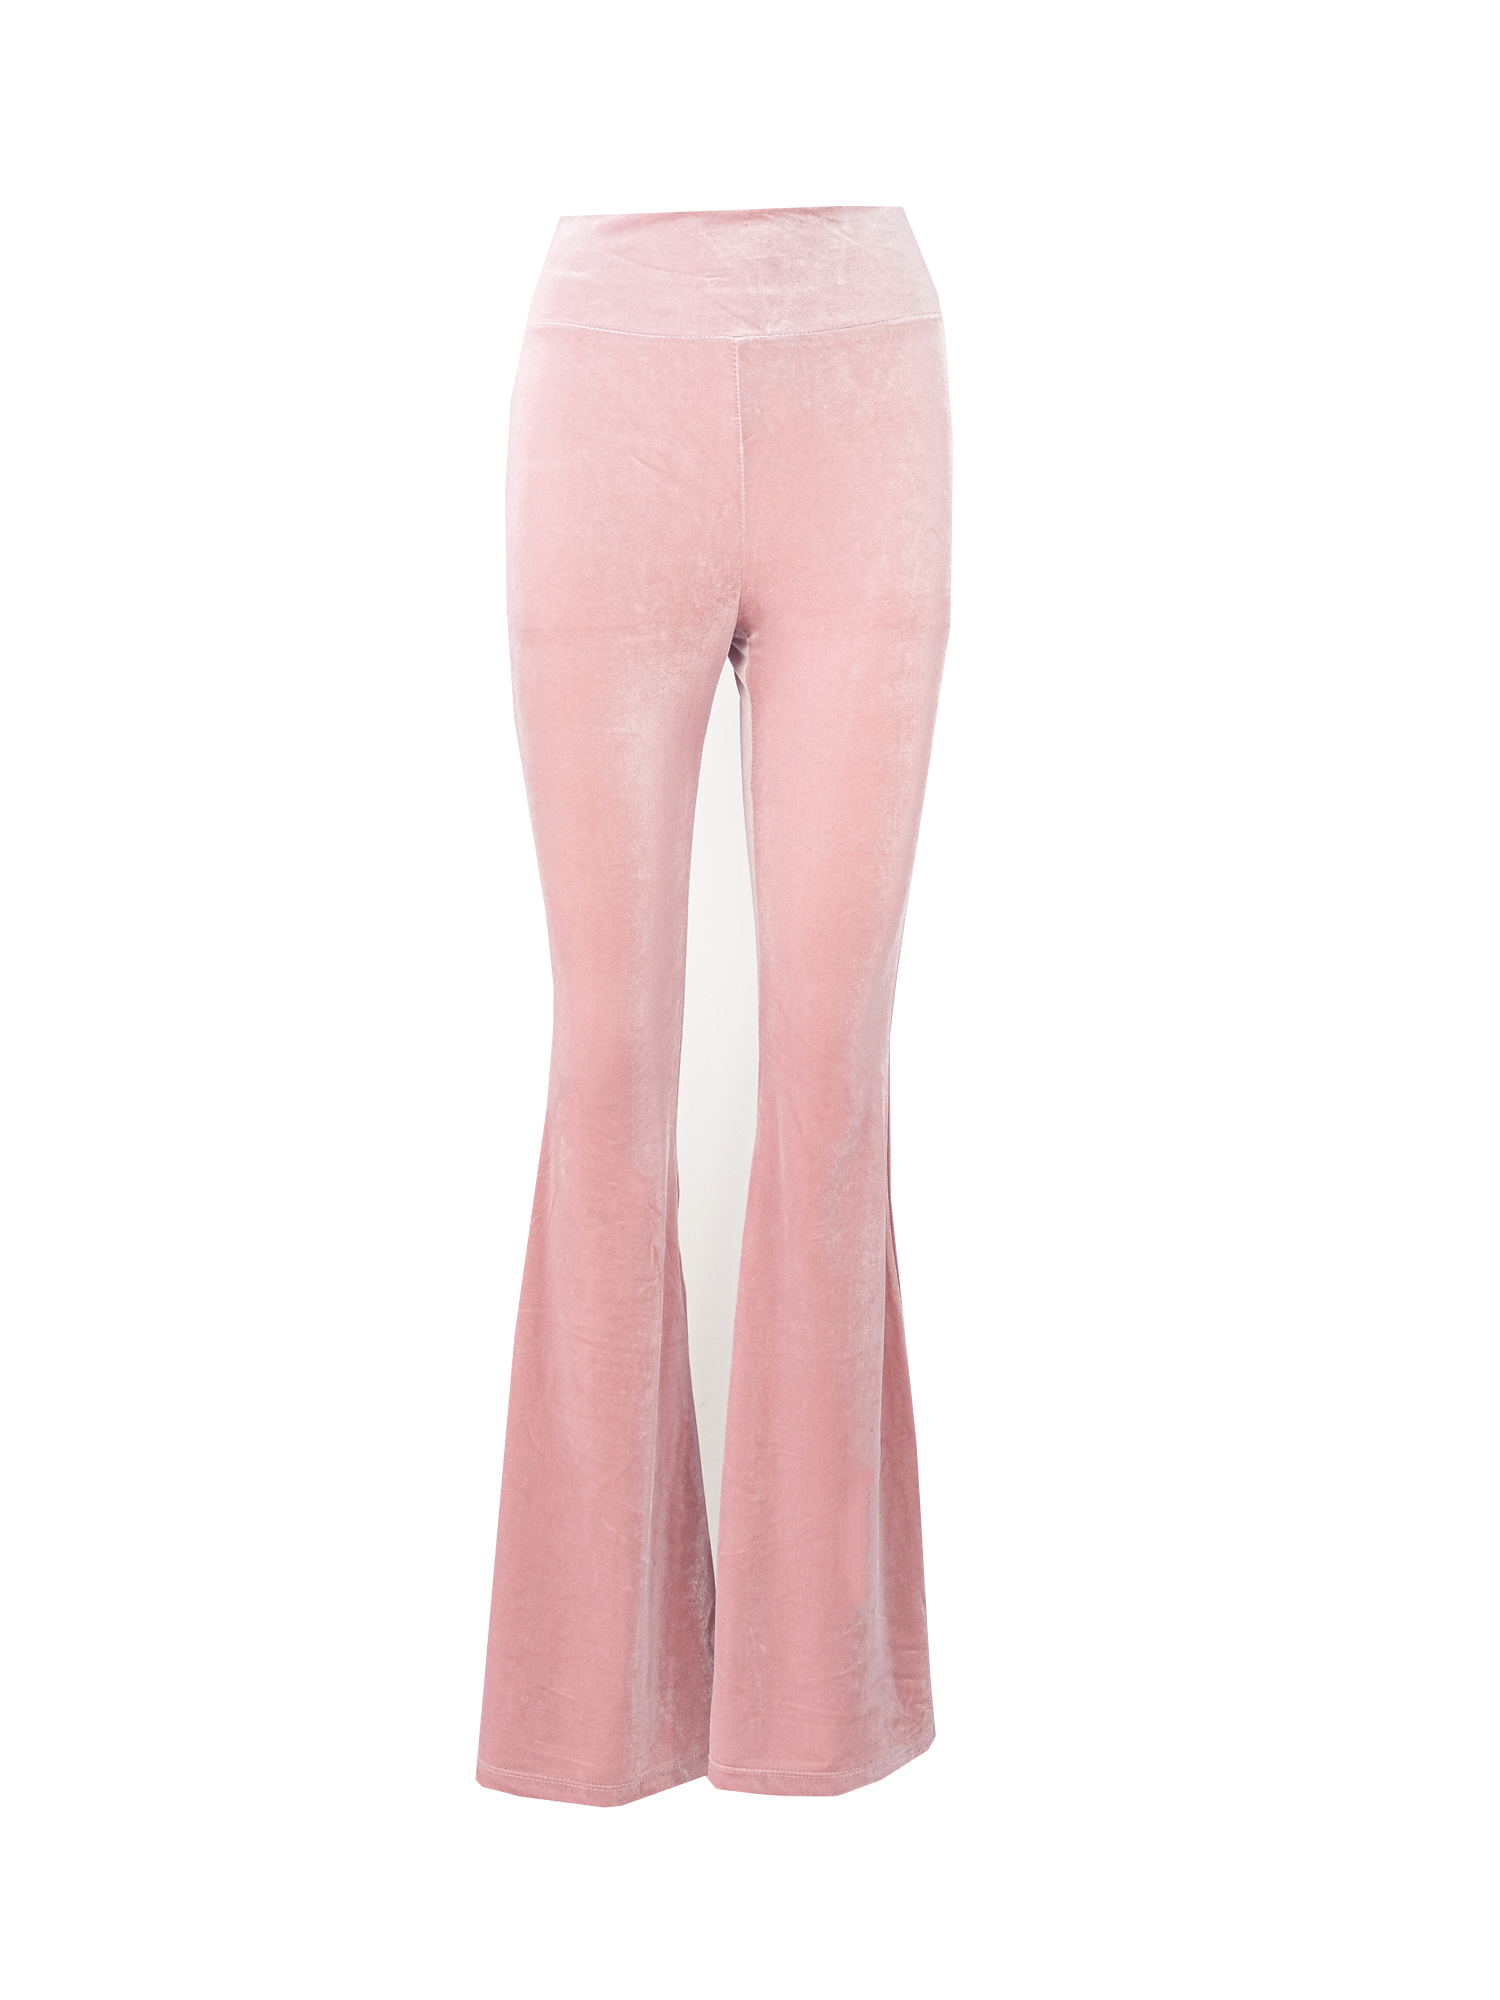 LOLA - flared trousers with high waist in pink chenille